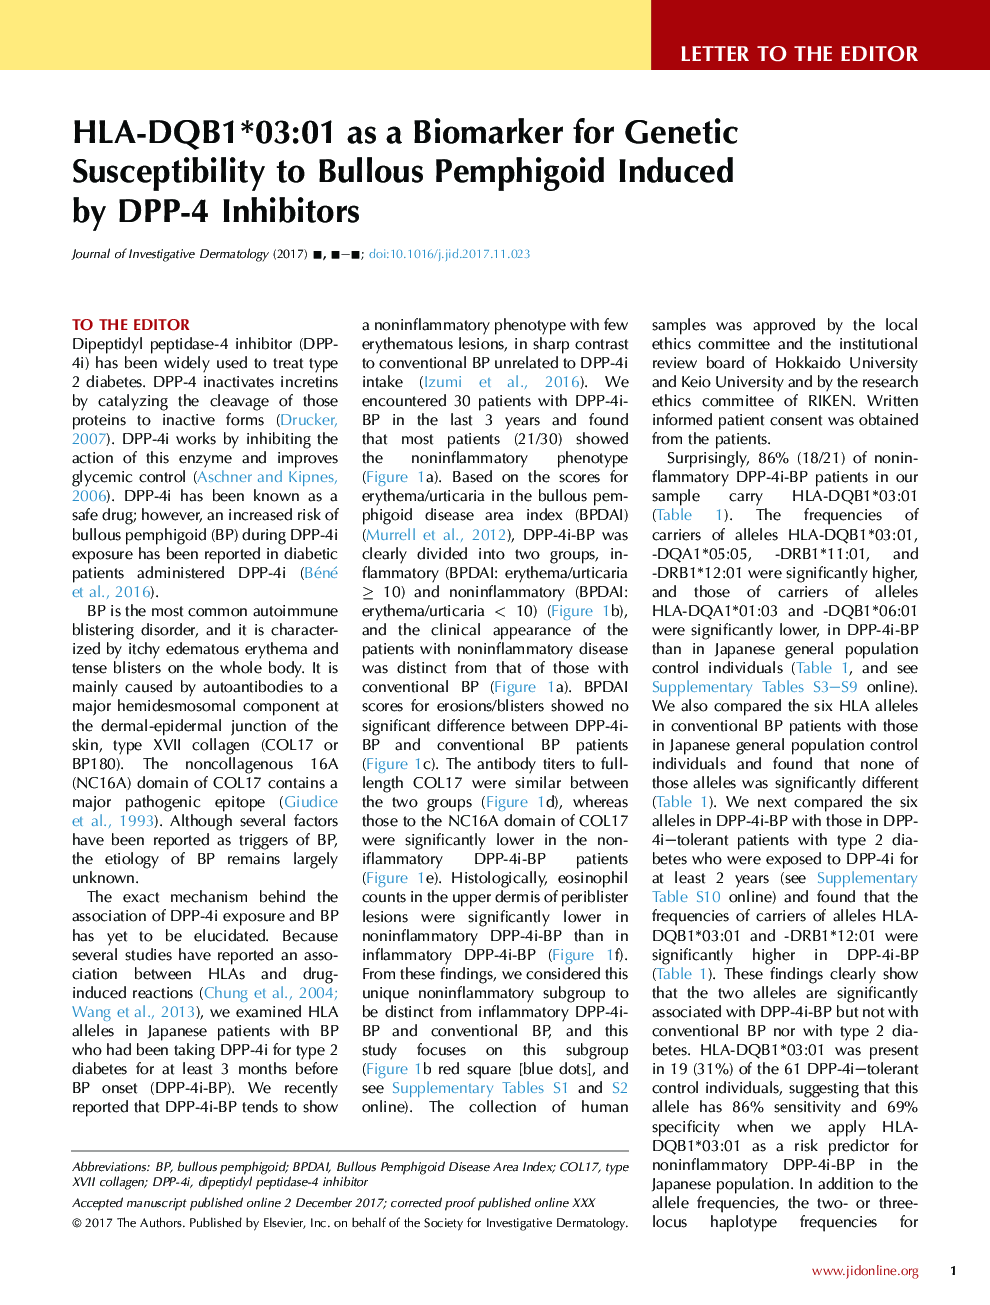 HLA-DQB1*03:01 as a Biomarker for Genetic Susceptibility to Bullous Pemphigoid Induced by DPP-4 Inhibitors